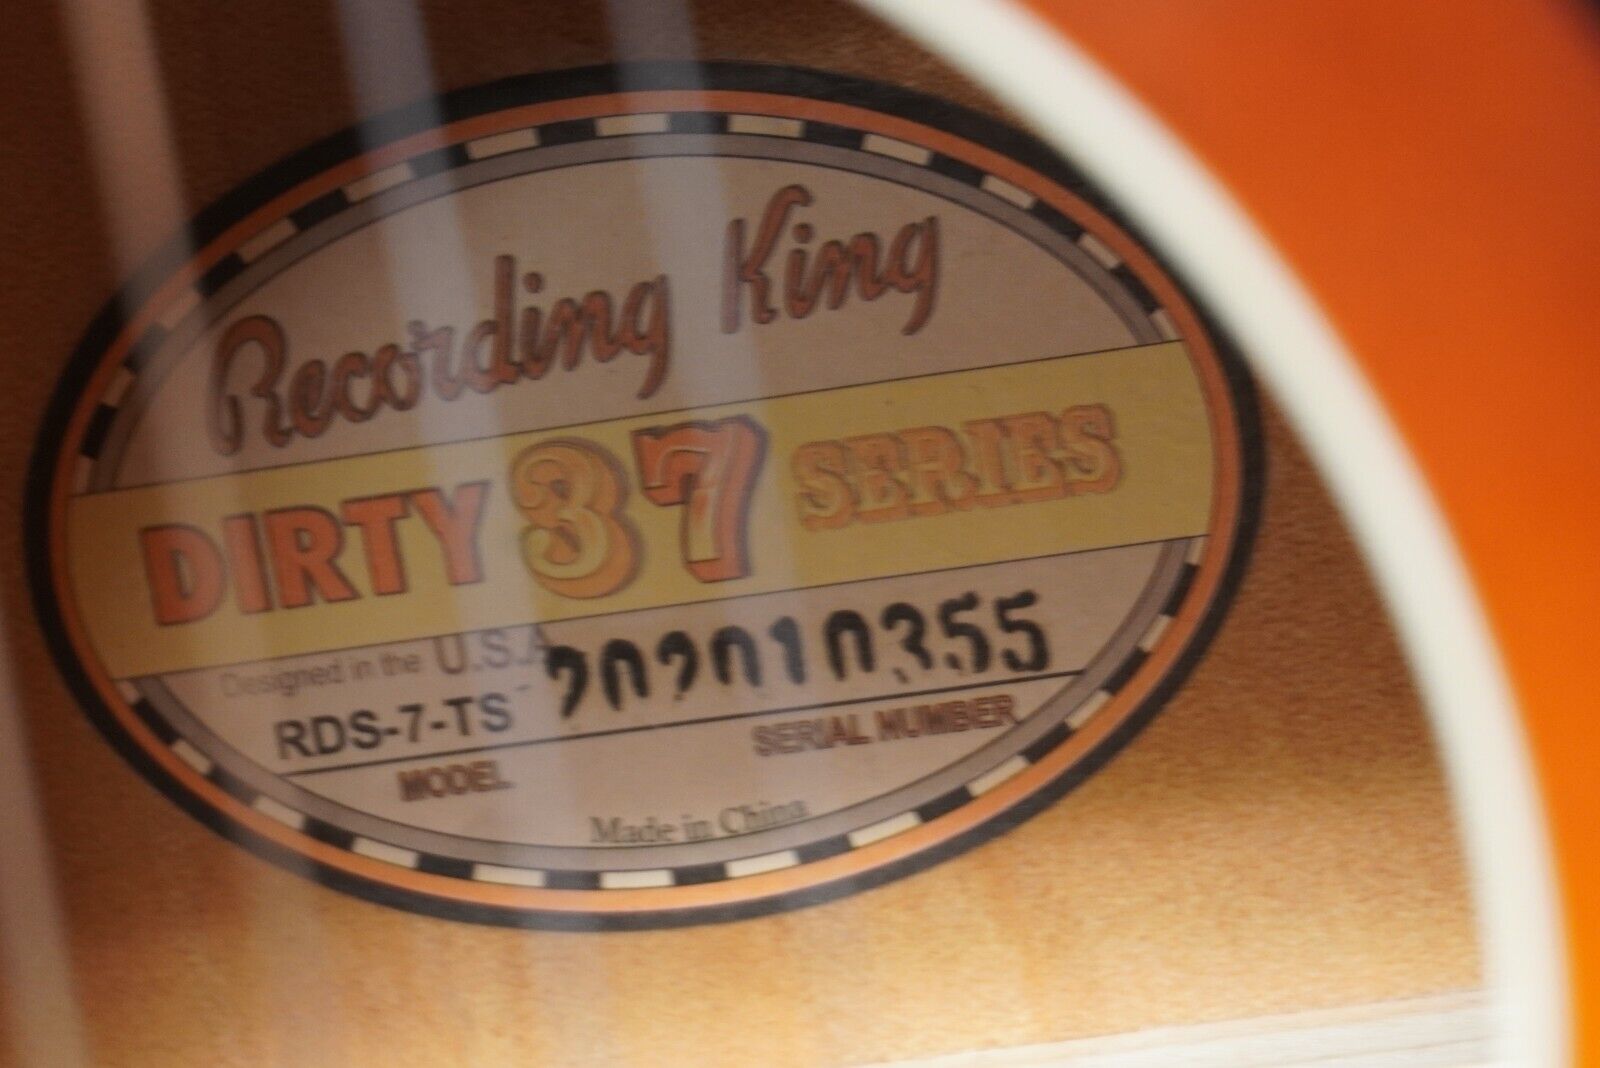 Recording King Dirty 37 Series RDS-7-TS Acoustic Guitar 13